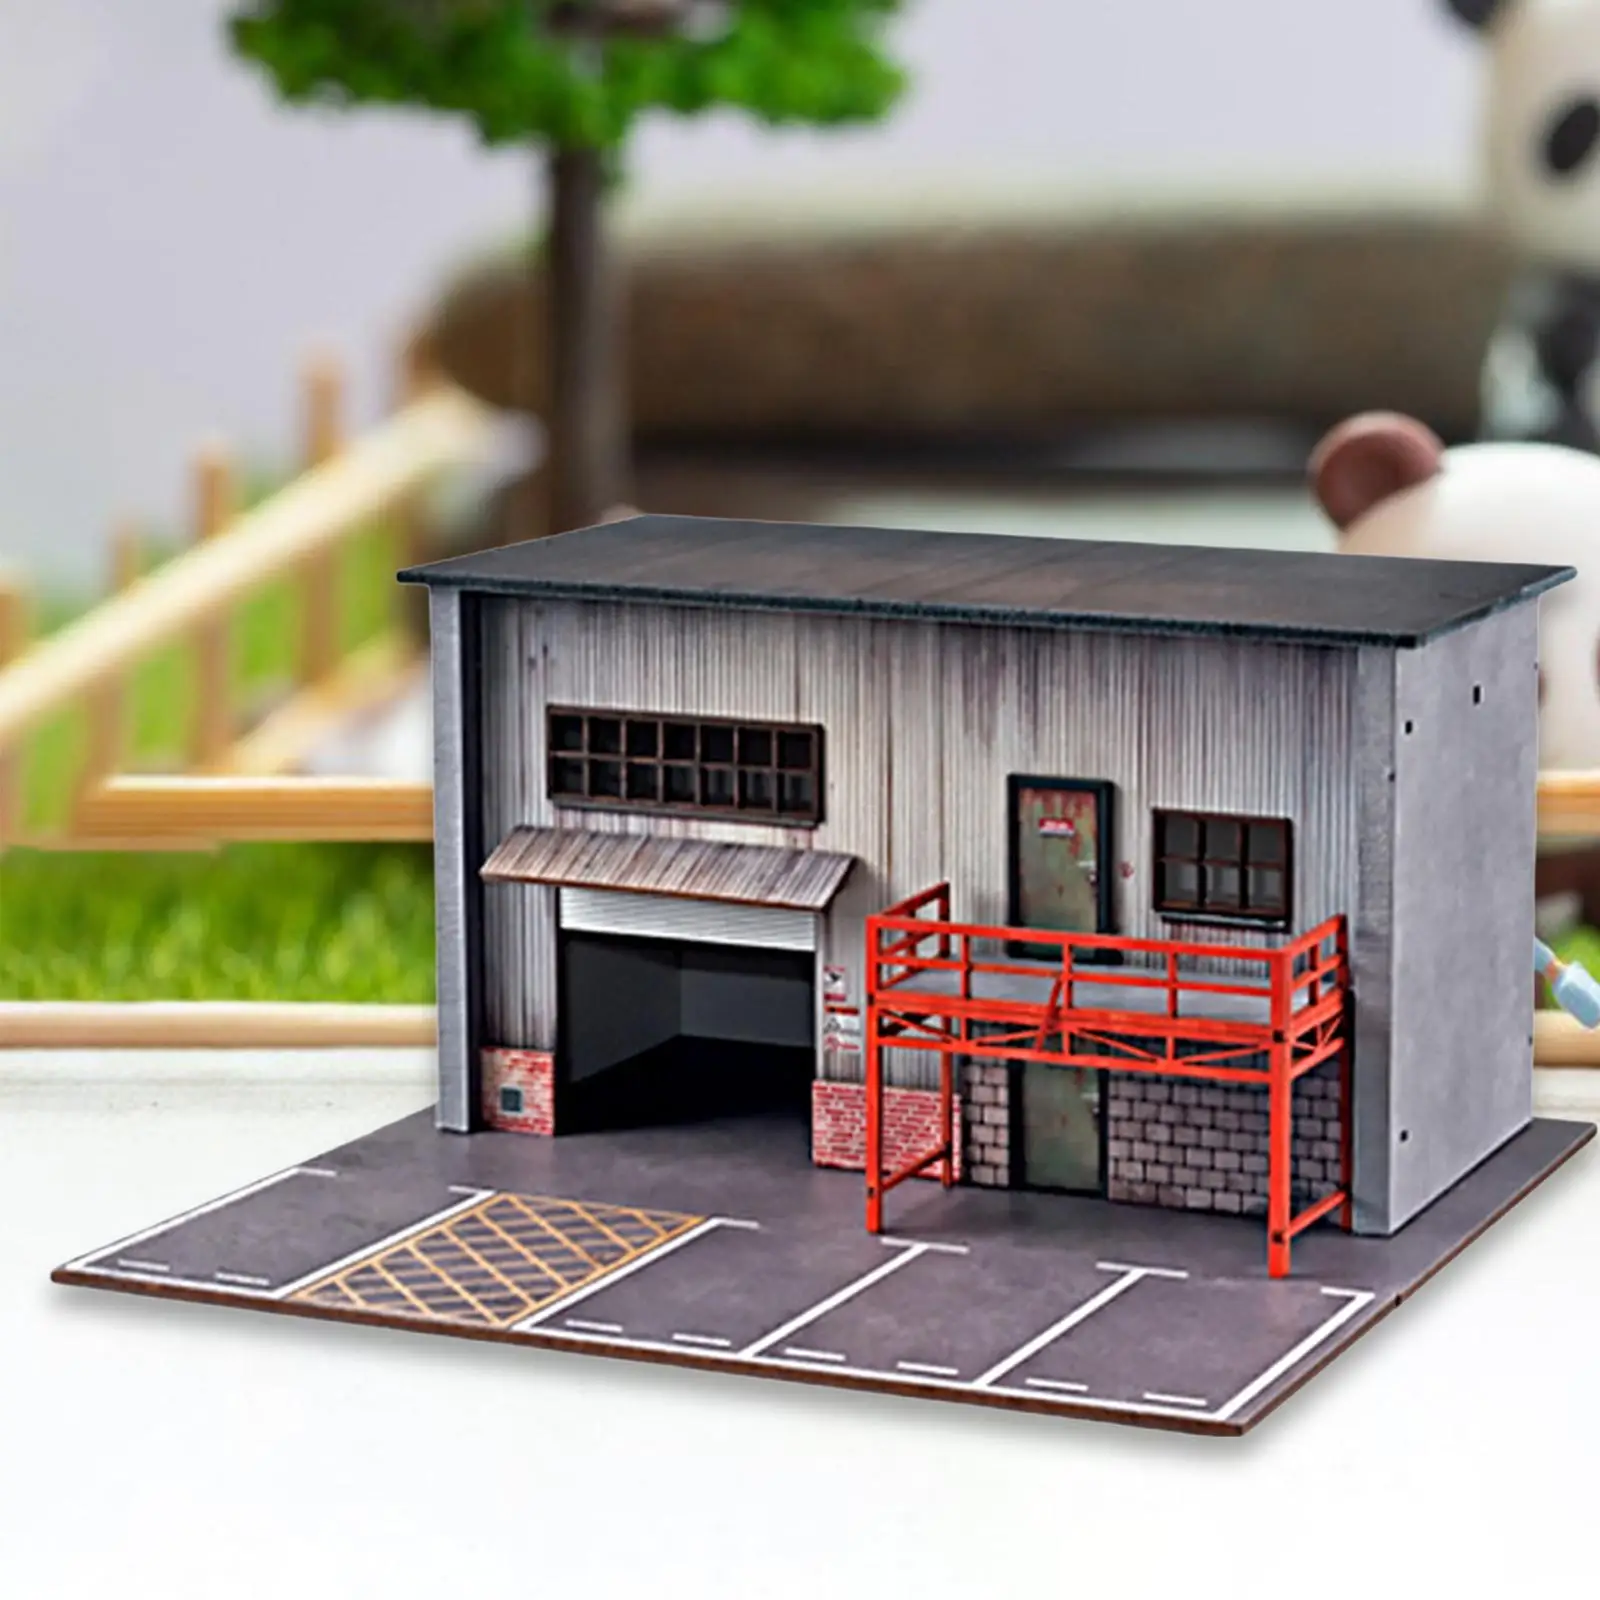 

1/64 Scale Diecast Model Car Display Case Vehicle Garage Display with Parking Lot Scene for Gifts Model Collectors Toy Cars